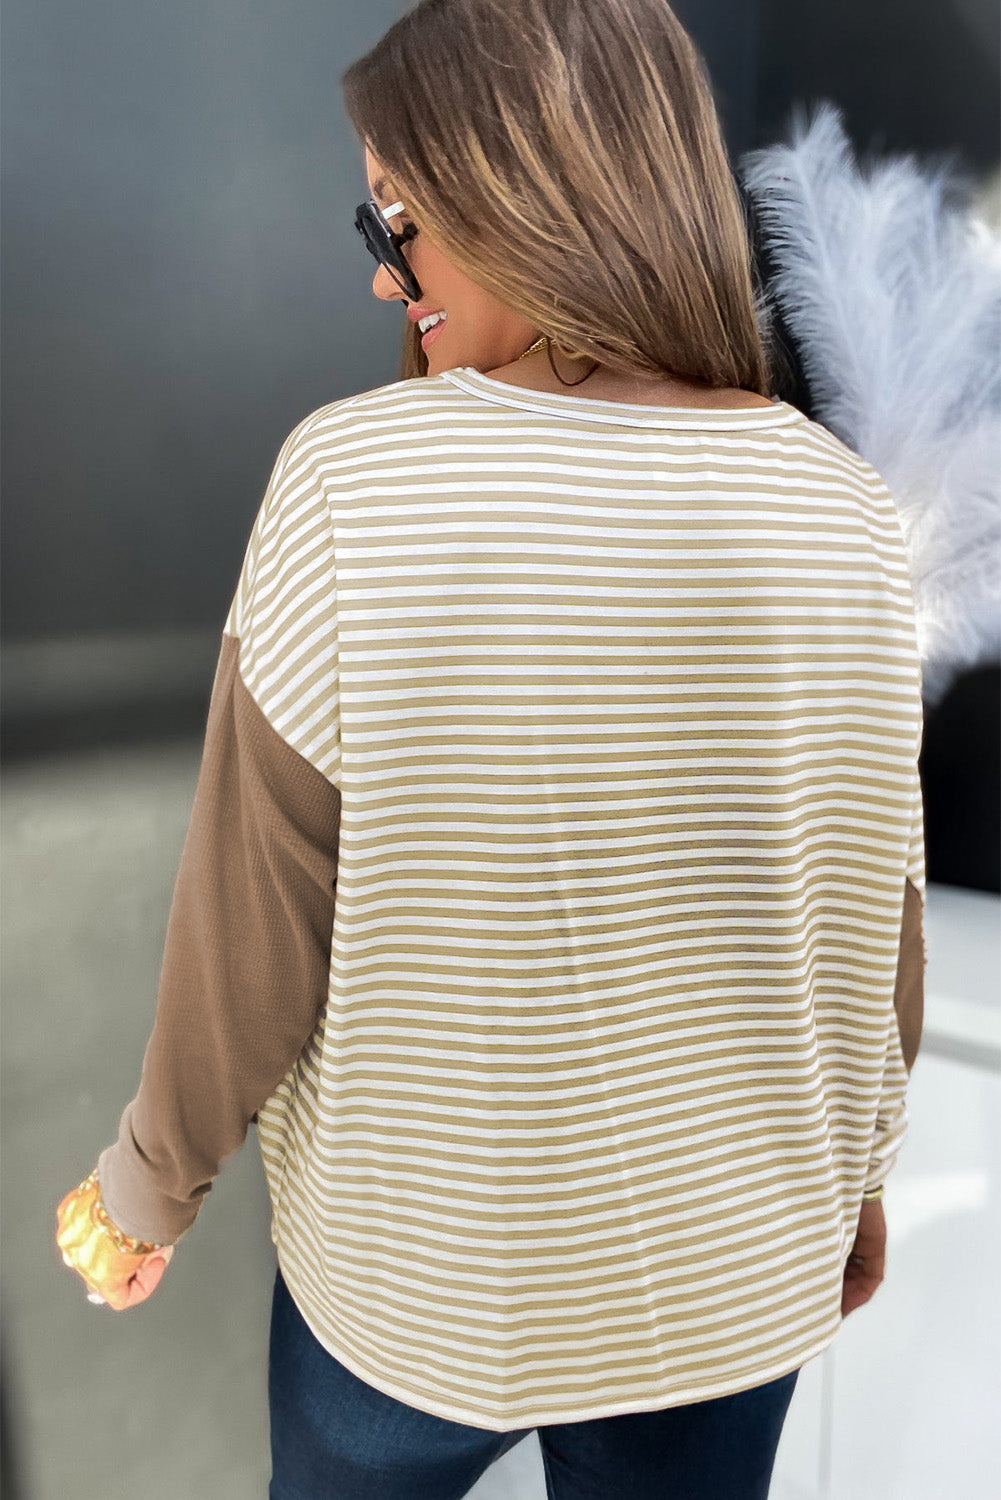 Striped Patchwork Long Sleeve Top